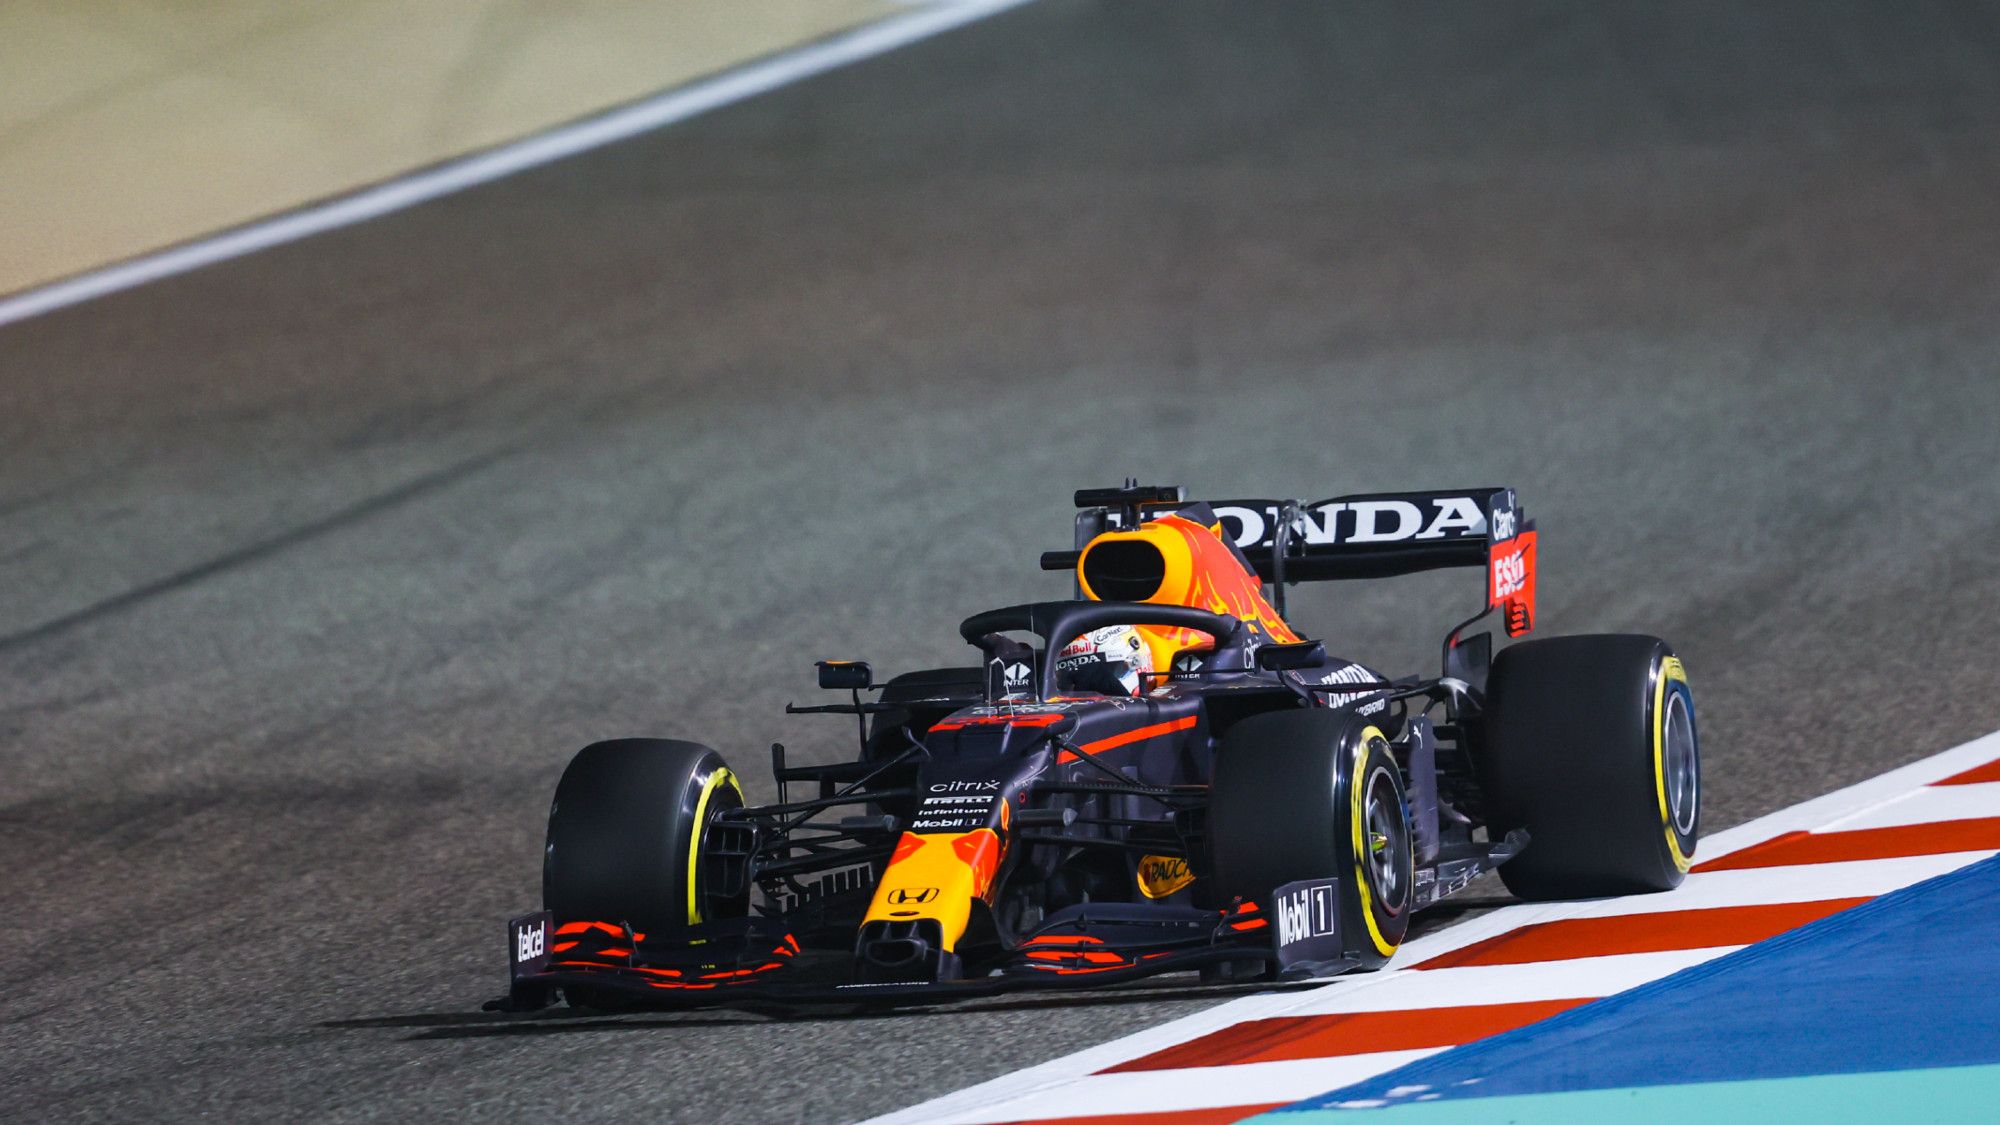 F1 Testing 2021 Day 3 (updated): Red Bull and Verstappen end testing fastest Sport Magazine